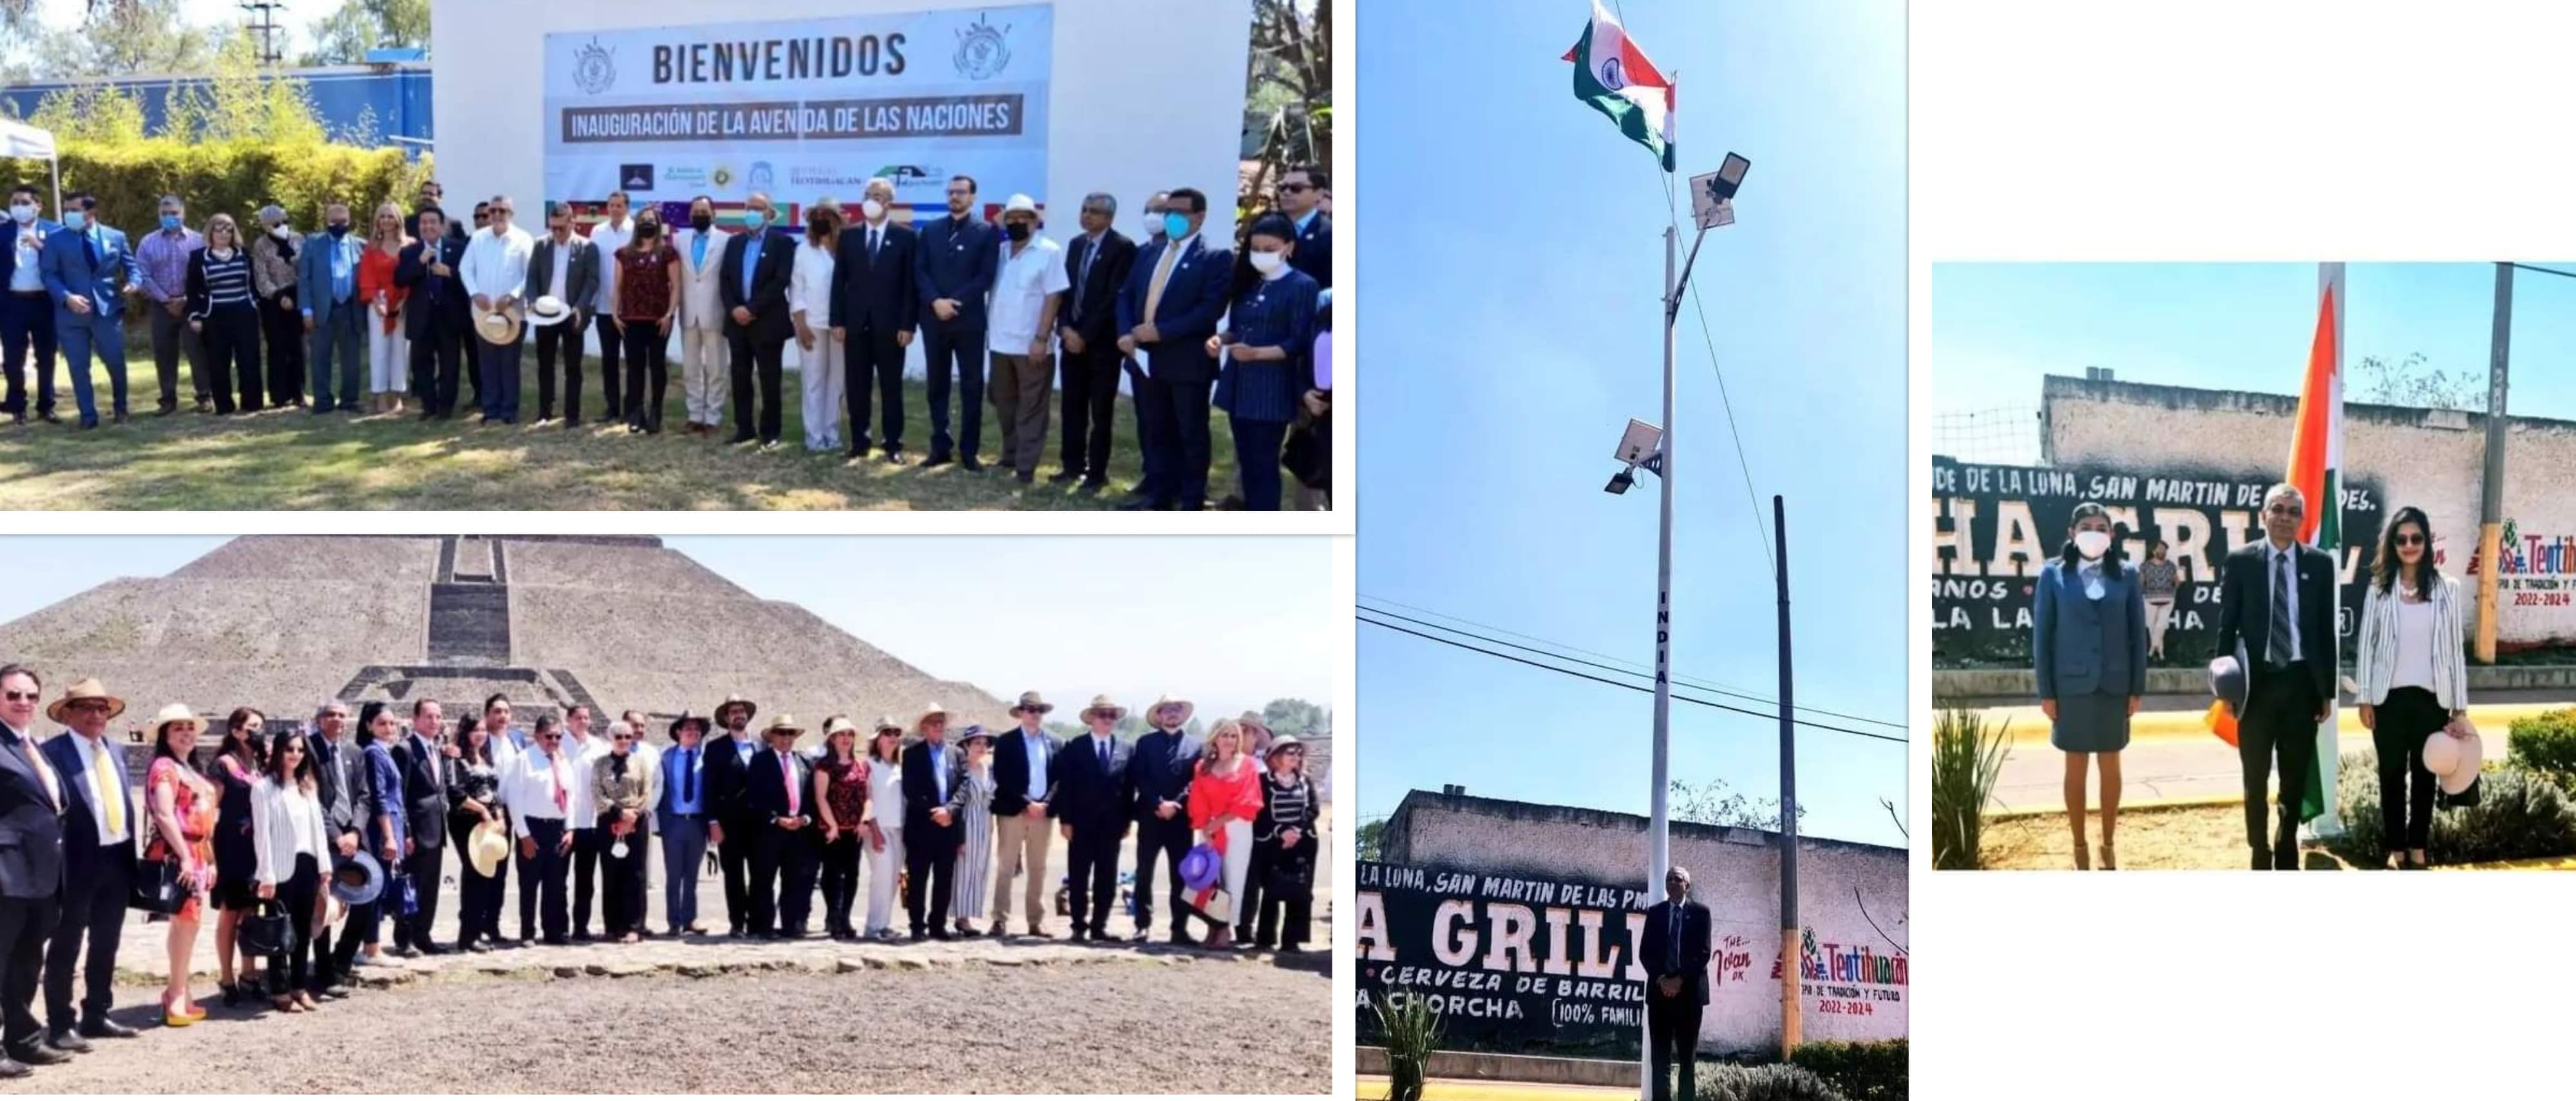  The Indian flag flies high during inauguration of the new Avenue of Nations at Municipality of Teotihuacan, State of Mexico.

Ambassador Pankaj Sharma expressed gratitude to its Mayor Mr.Mario Paredesv for honoring India in México. This further strengthens bond of our friendship & cultural ties.